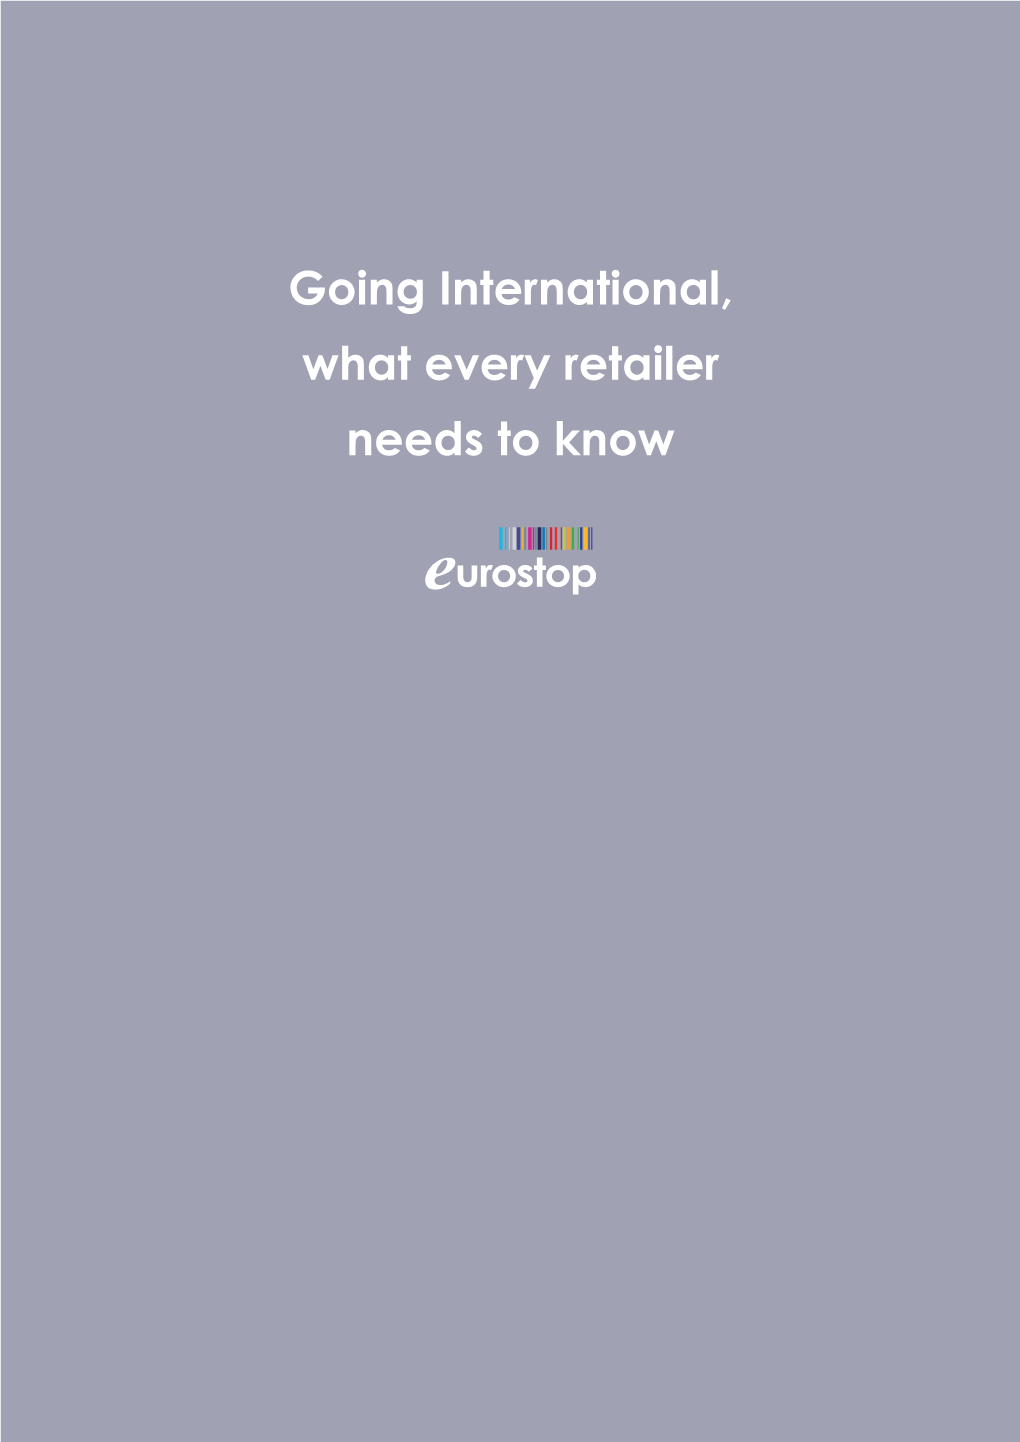 Going International What Every Retailer Needs to Know